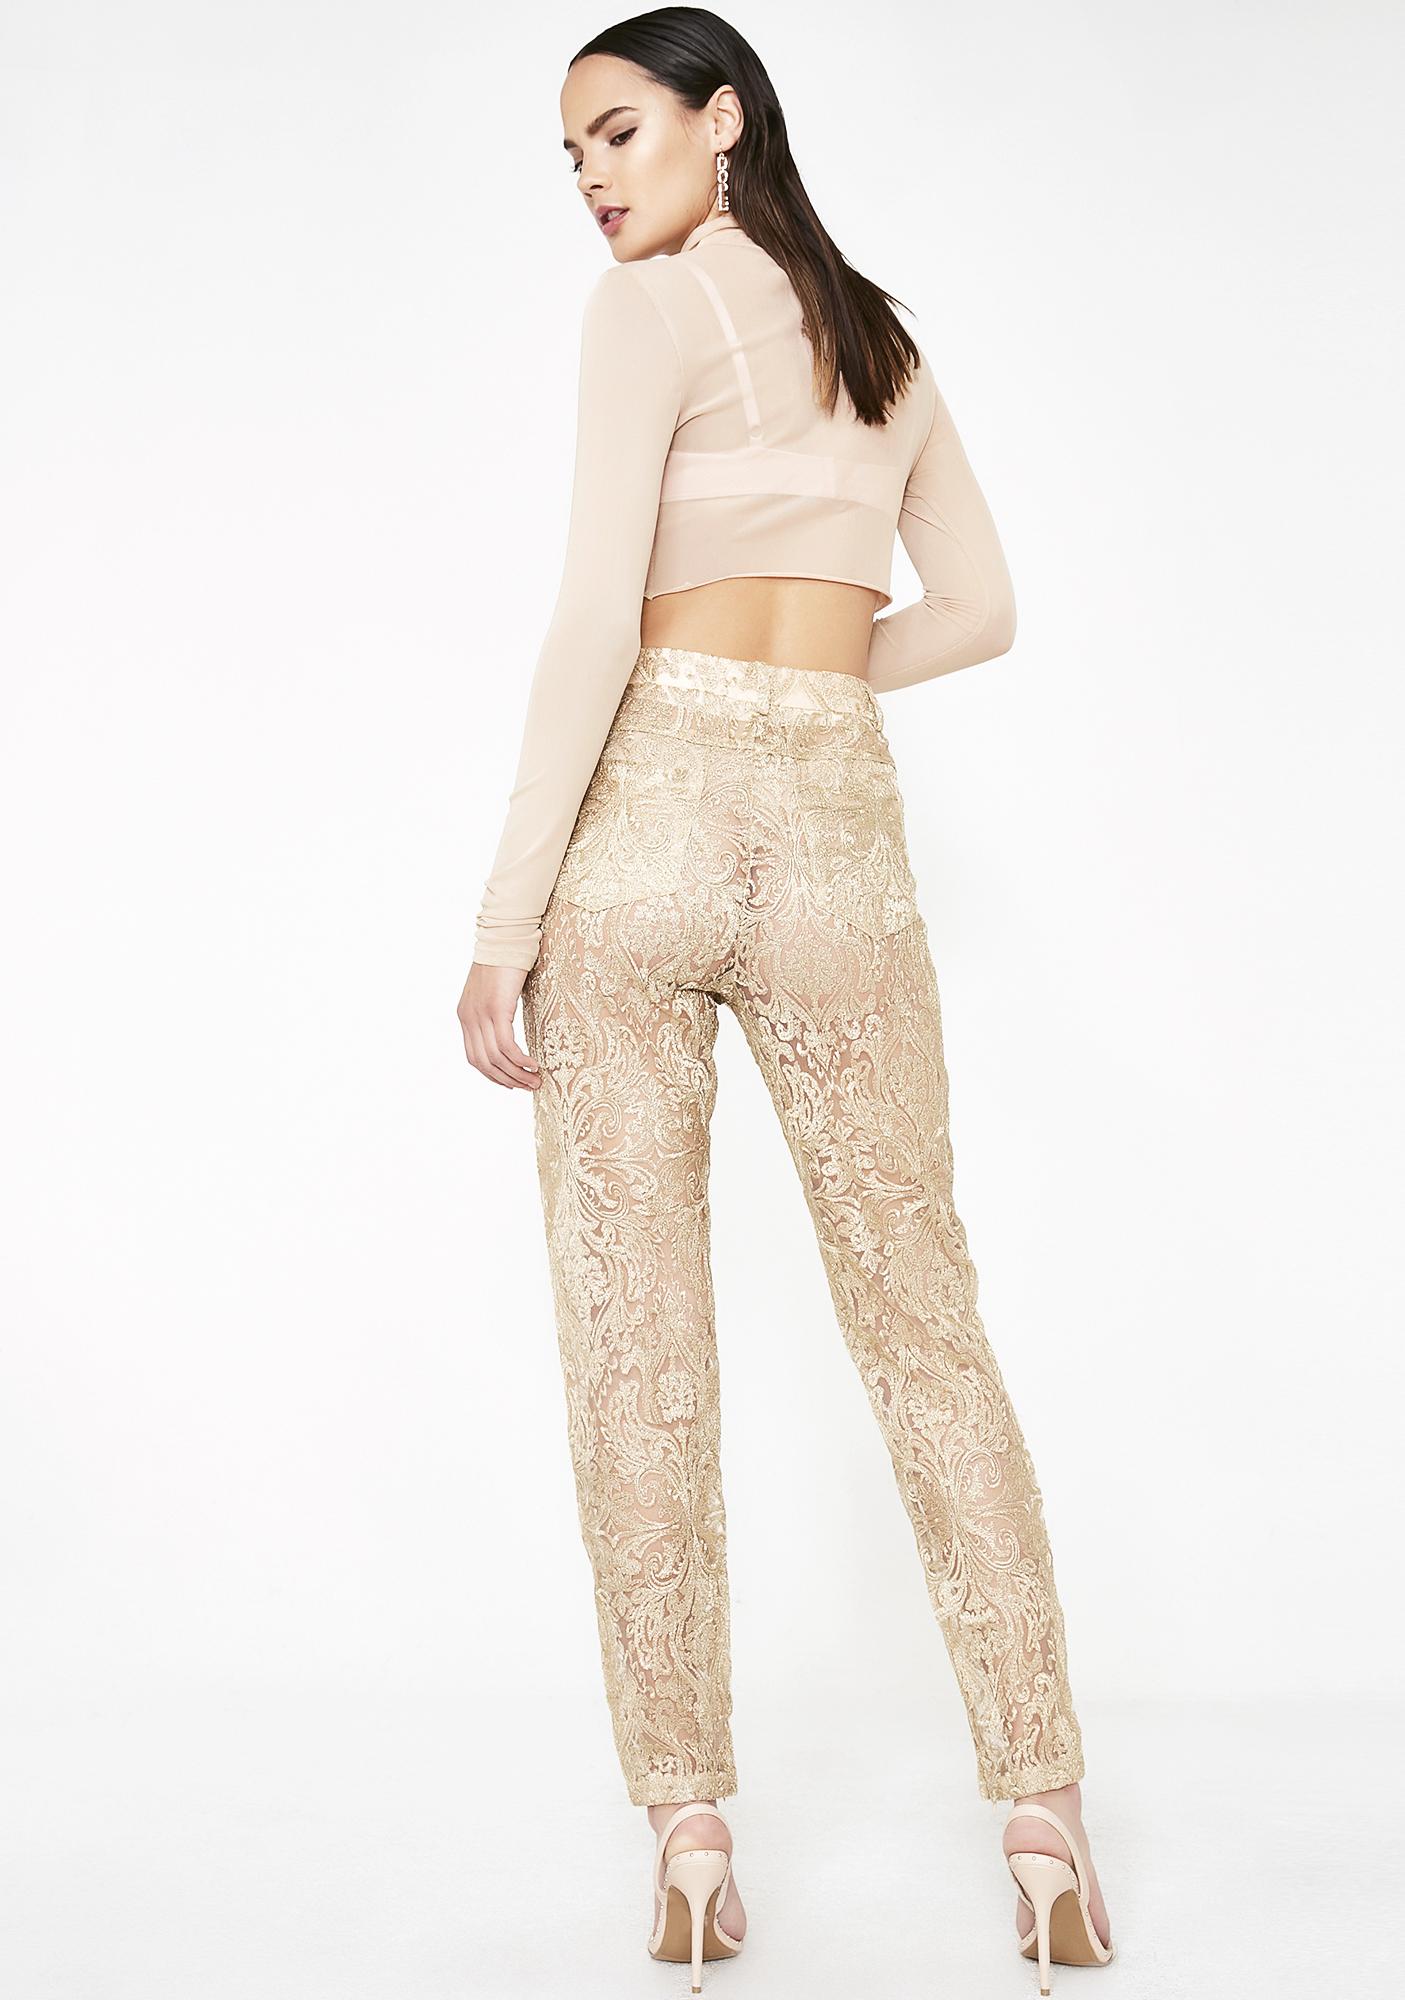 jagger and stone gold pants